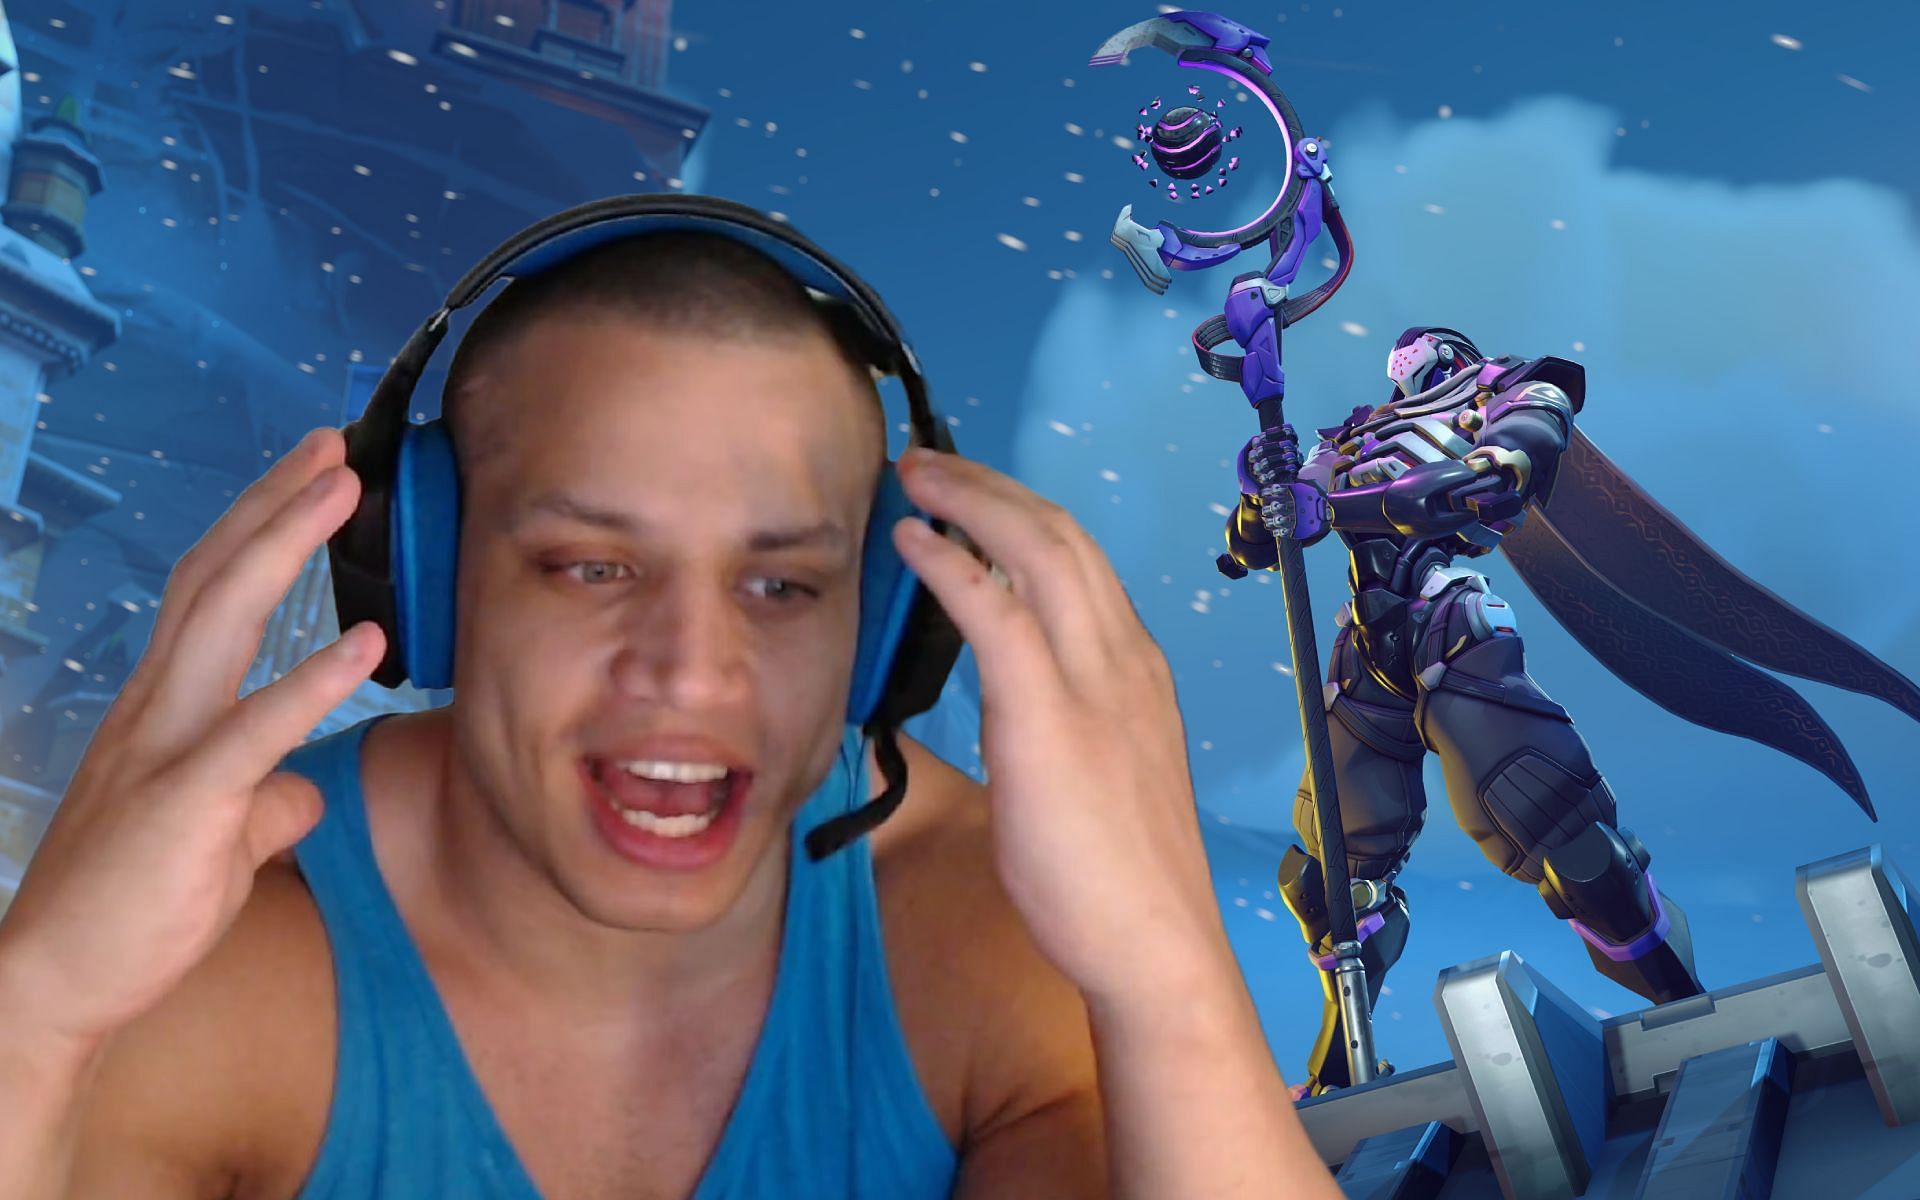 Tyler1 talks about not wanting to play Overwatch 2 outside of sponsored streams (Image via Sportskeeda)